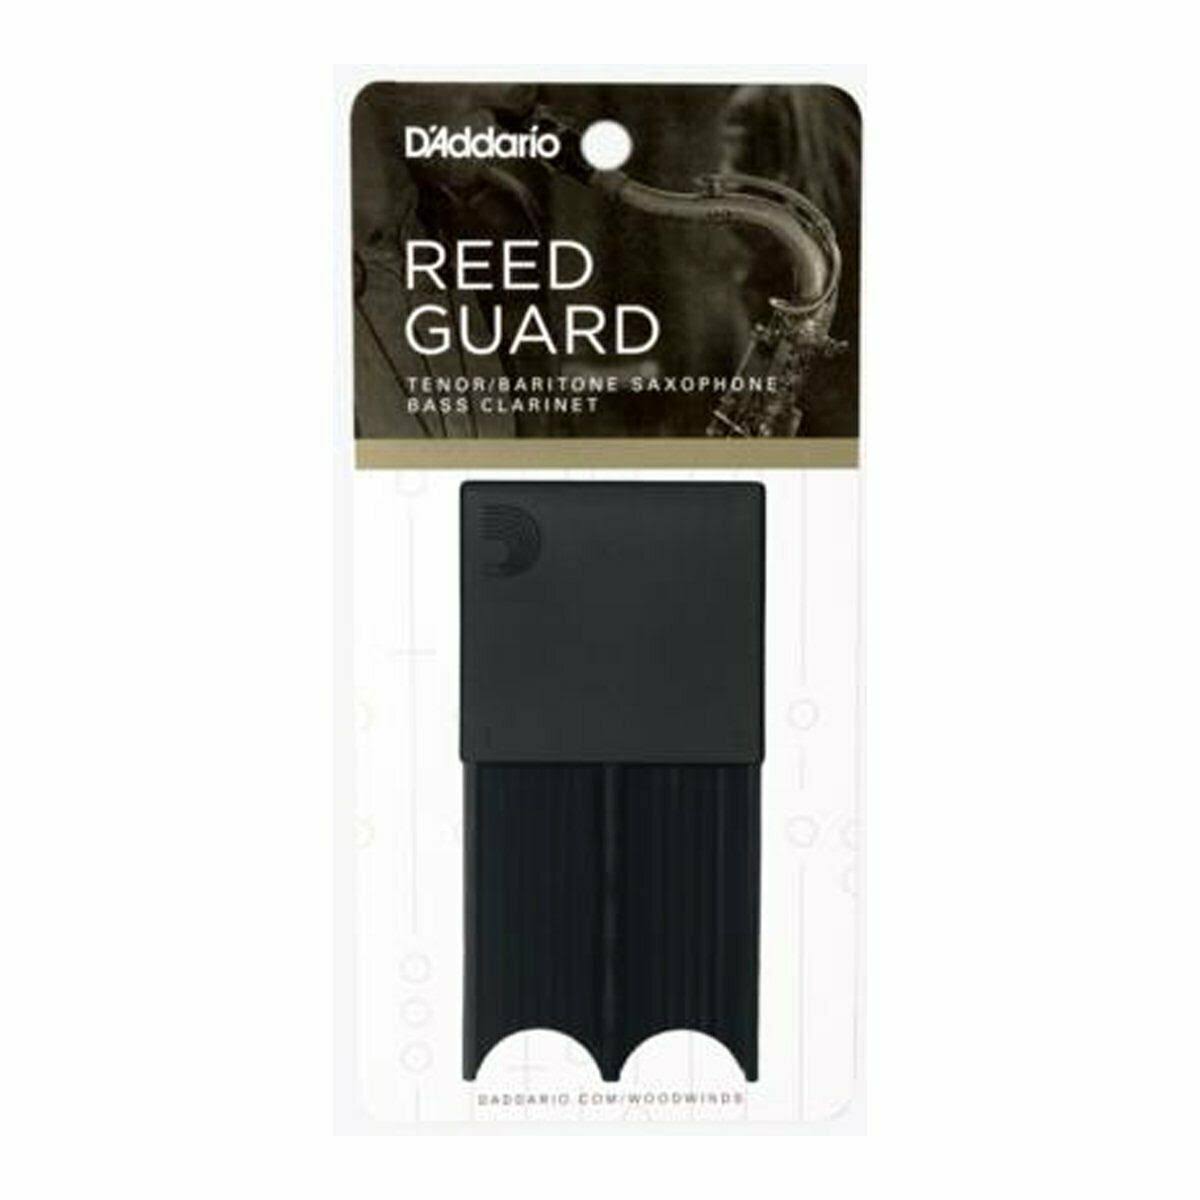 D'addario Woodwinds Reed Guard For Tenor/Baritone Saxophone And Bass Clarinet - Black